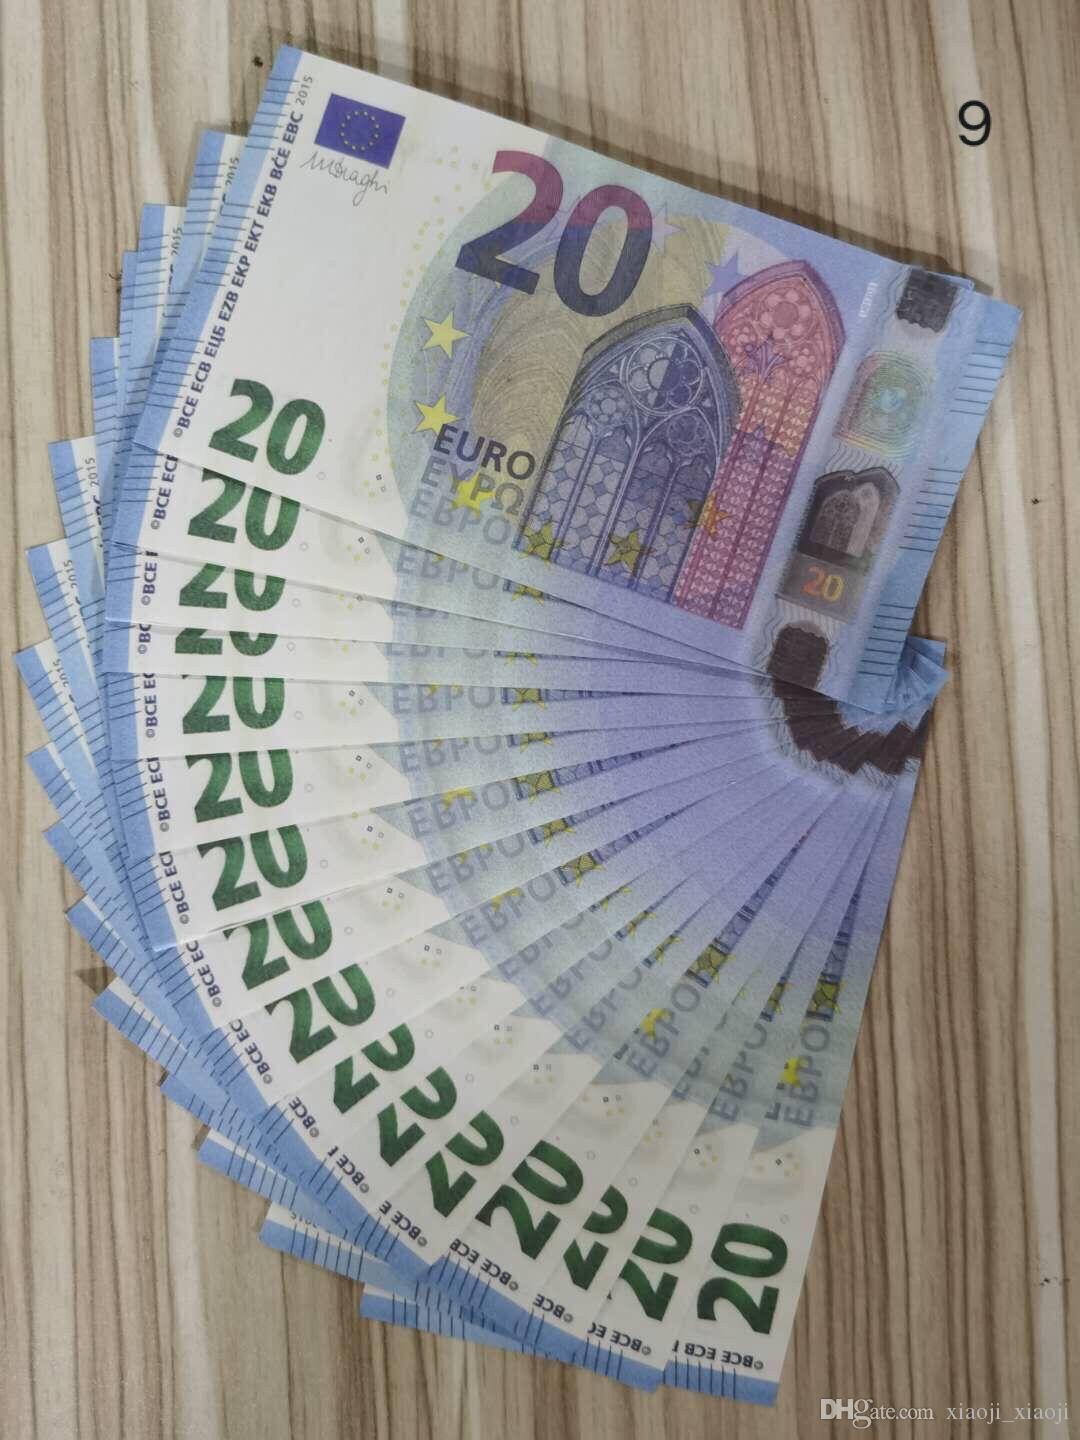 

Prop Money Realistic Euros Most 20 Note Business Play Fake Bank Movie Copy For Paper Nightclub Collection 23 Uviec